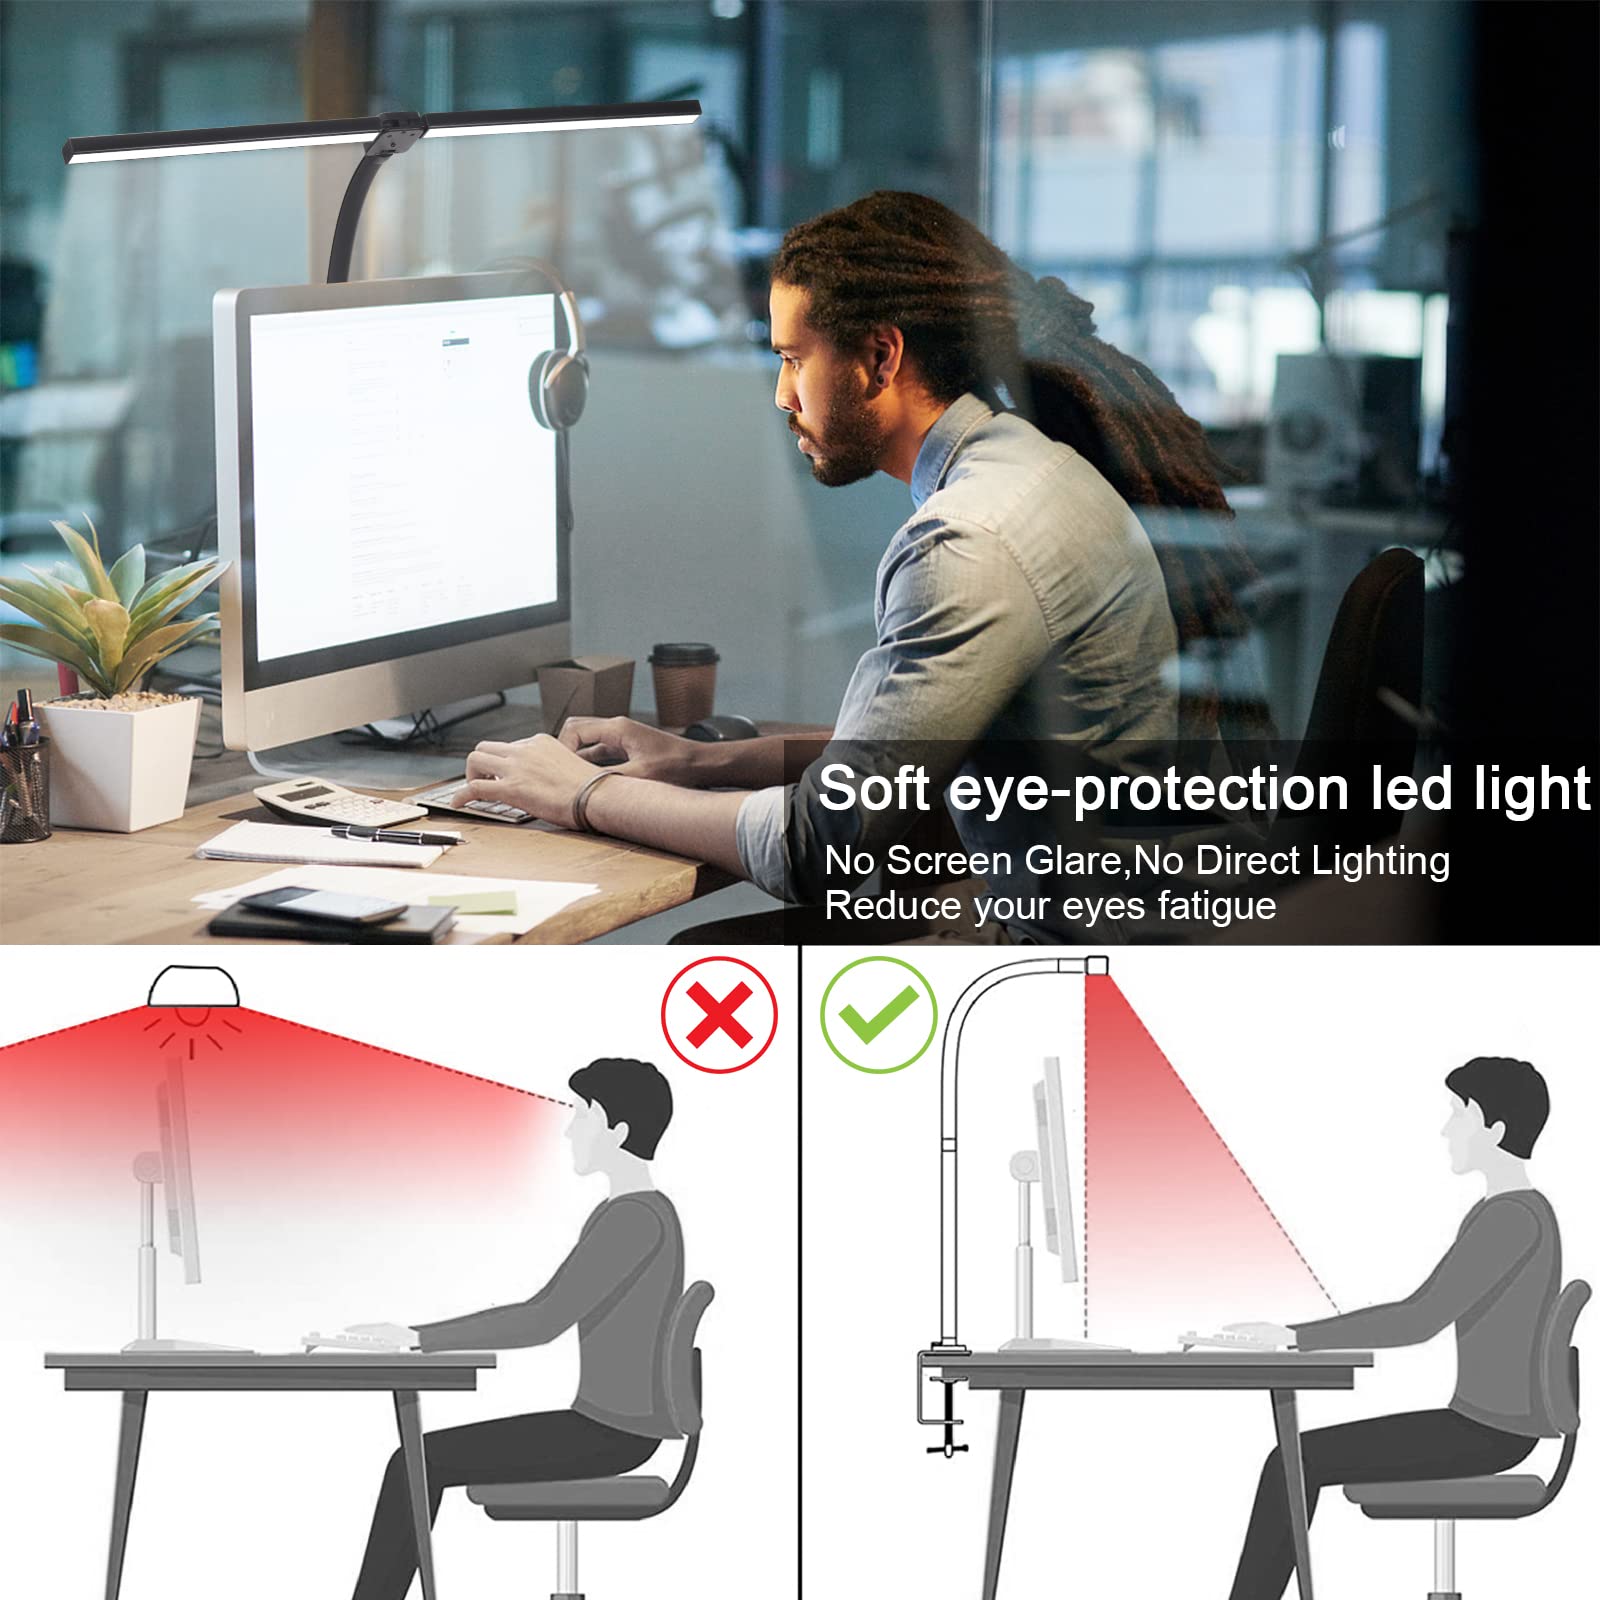 hamiey LED Desk Lamp,Architect Desk Lamps for Home Office,24W Brightest Workbench Office LED Reading Lighting 5 Color Modes and 5 Dimmable Eye Protection Desk Lamp for Monitor Studio Reading